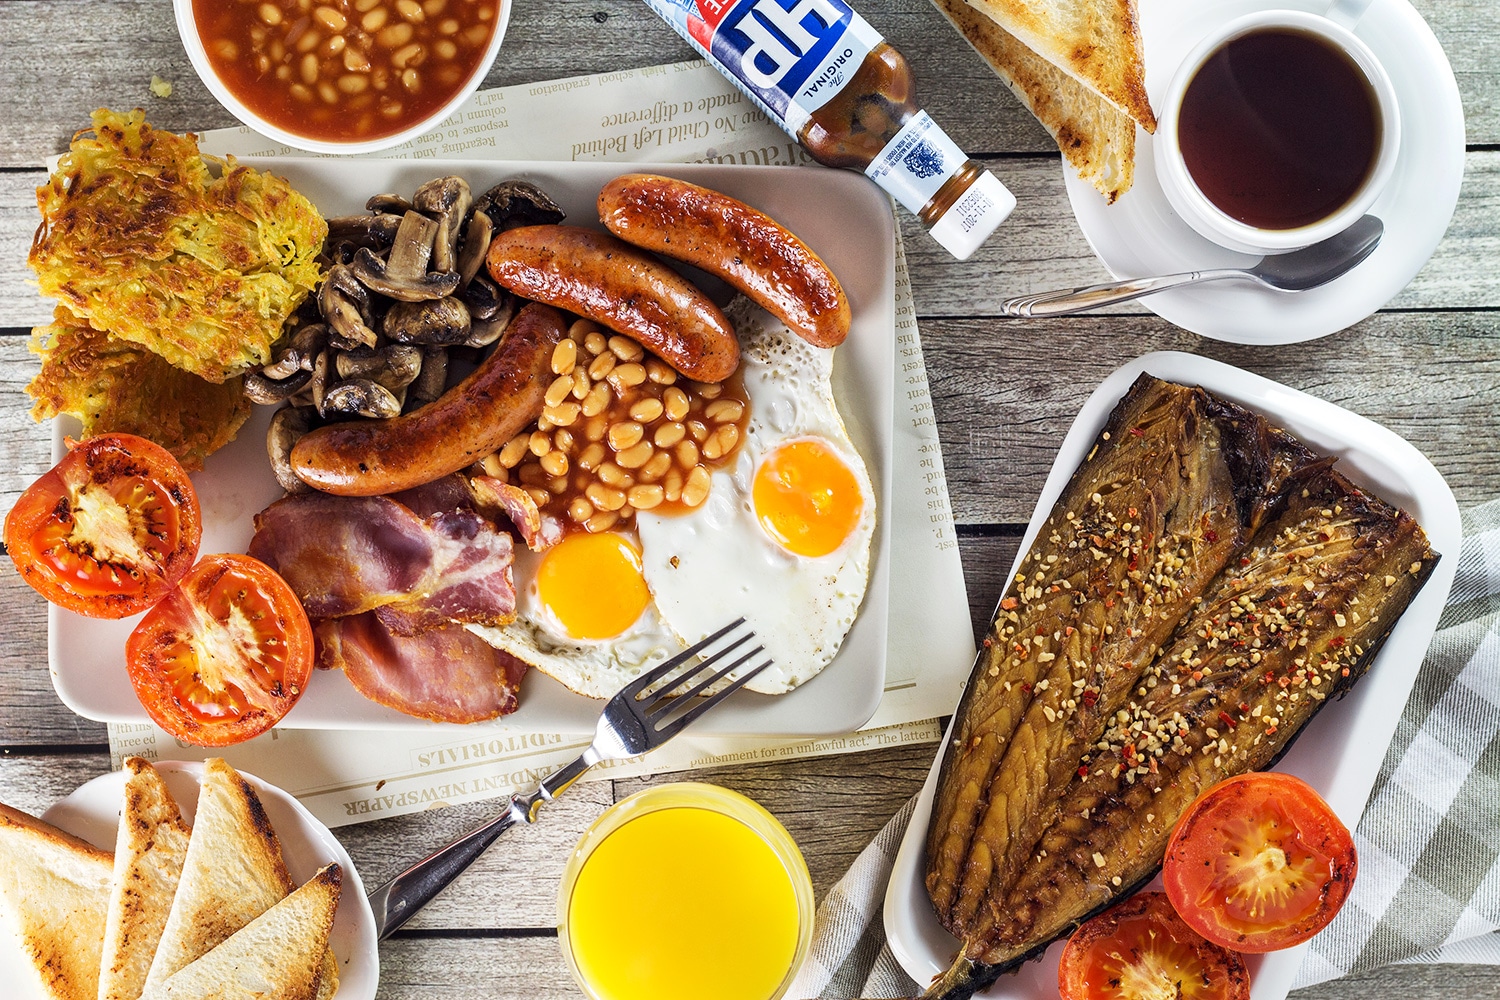 A look at the most iconic morning fare in the world - English breakfast. This hearty meal features eggs, sausages, bacon, beans, mushrooms, and more! | cookingtheglobe.com